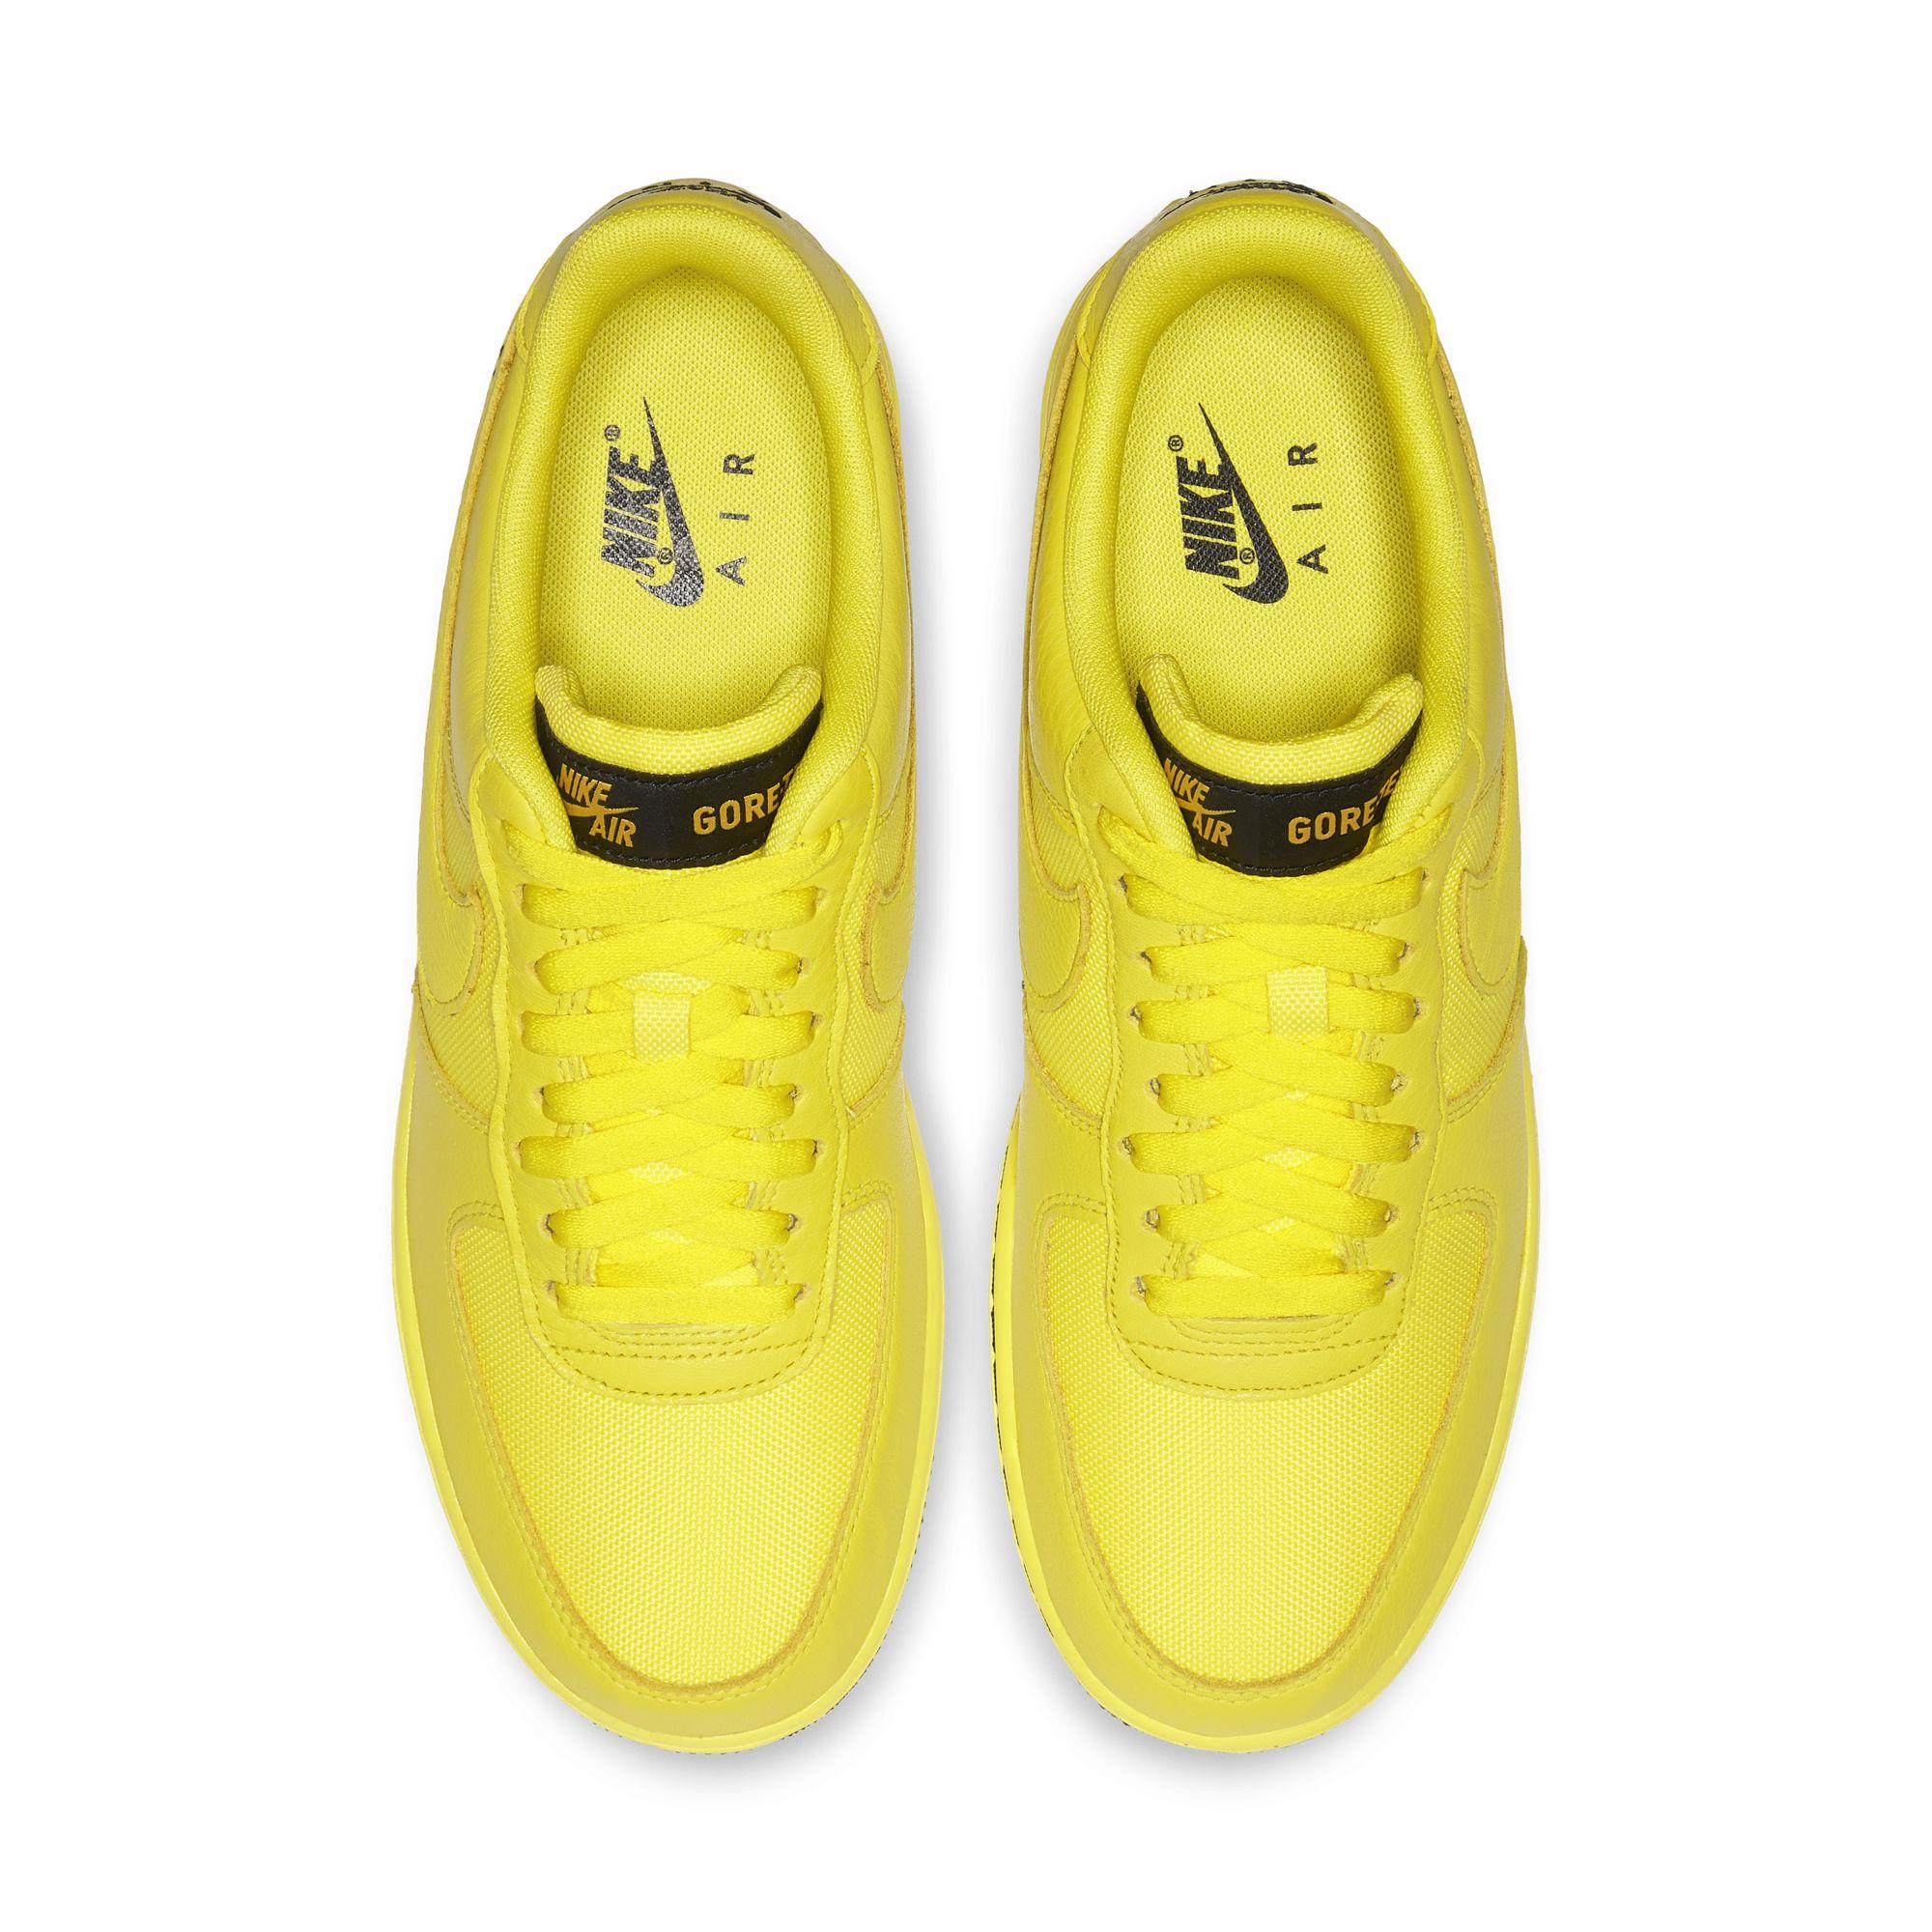 Nike Rubber Air Force 1 Gore-tex Shoe in Yellow for Men - Lyst